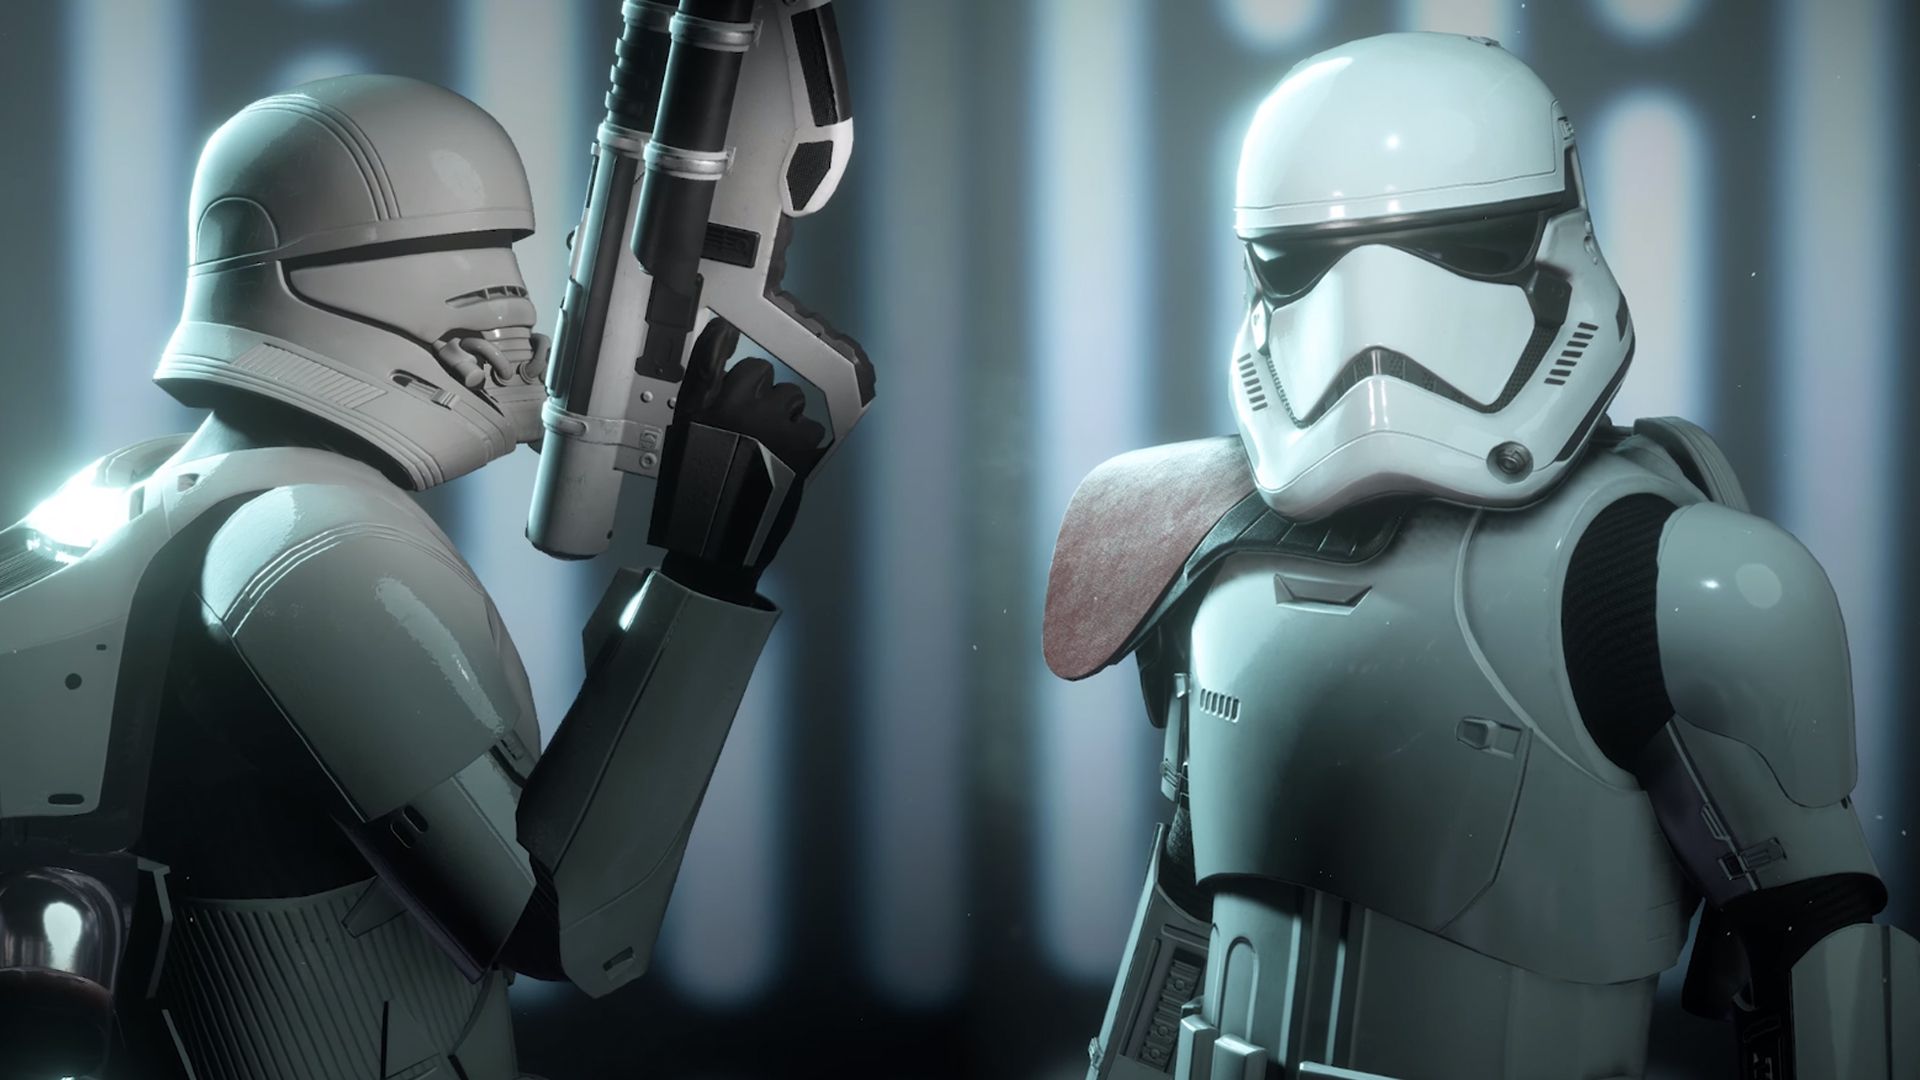 Star Wars Battlefront II's Celebration Edition is free on the Epic Games  Store